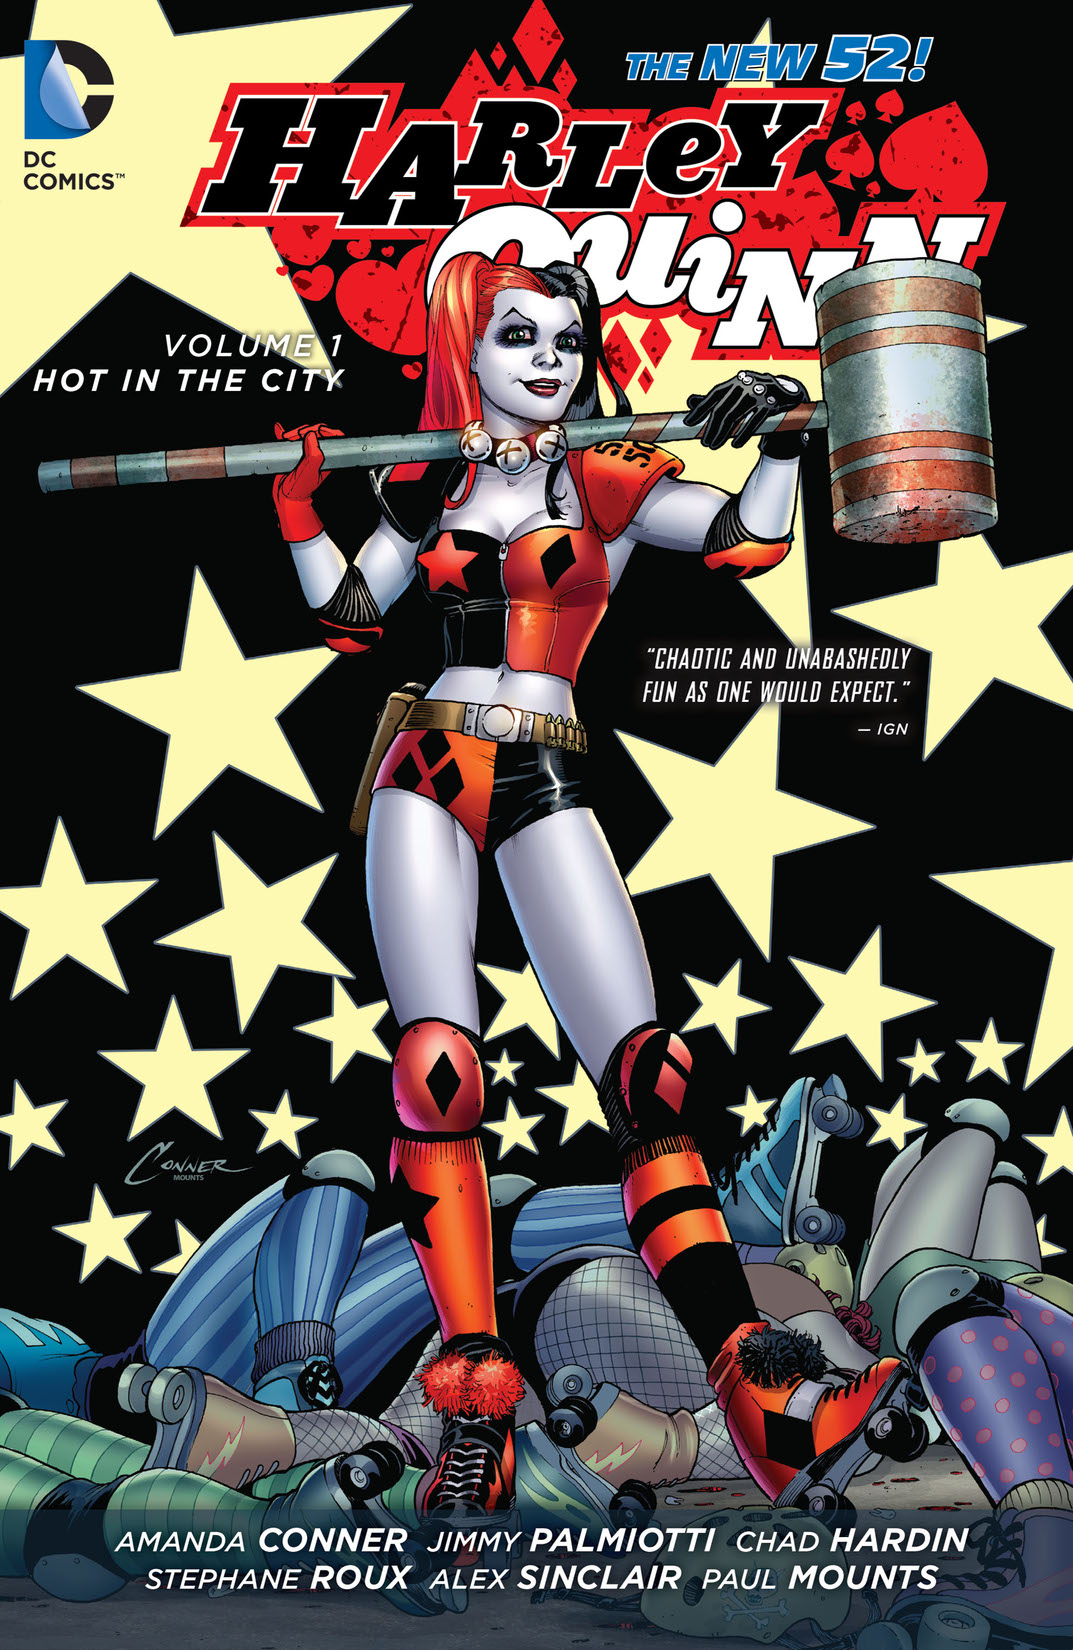 Harley Quinn Vol. 1: Hot in the City preview images